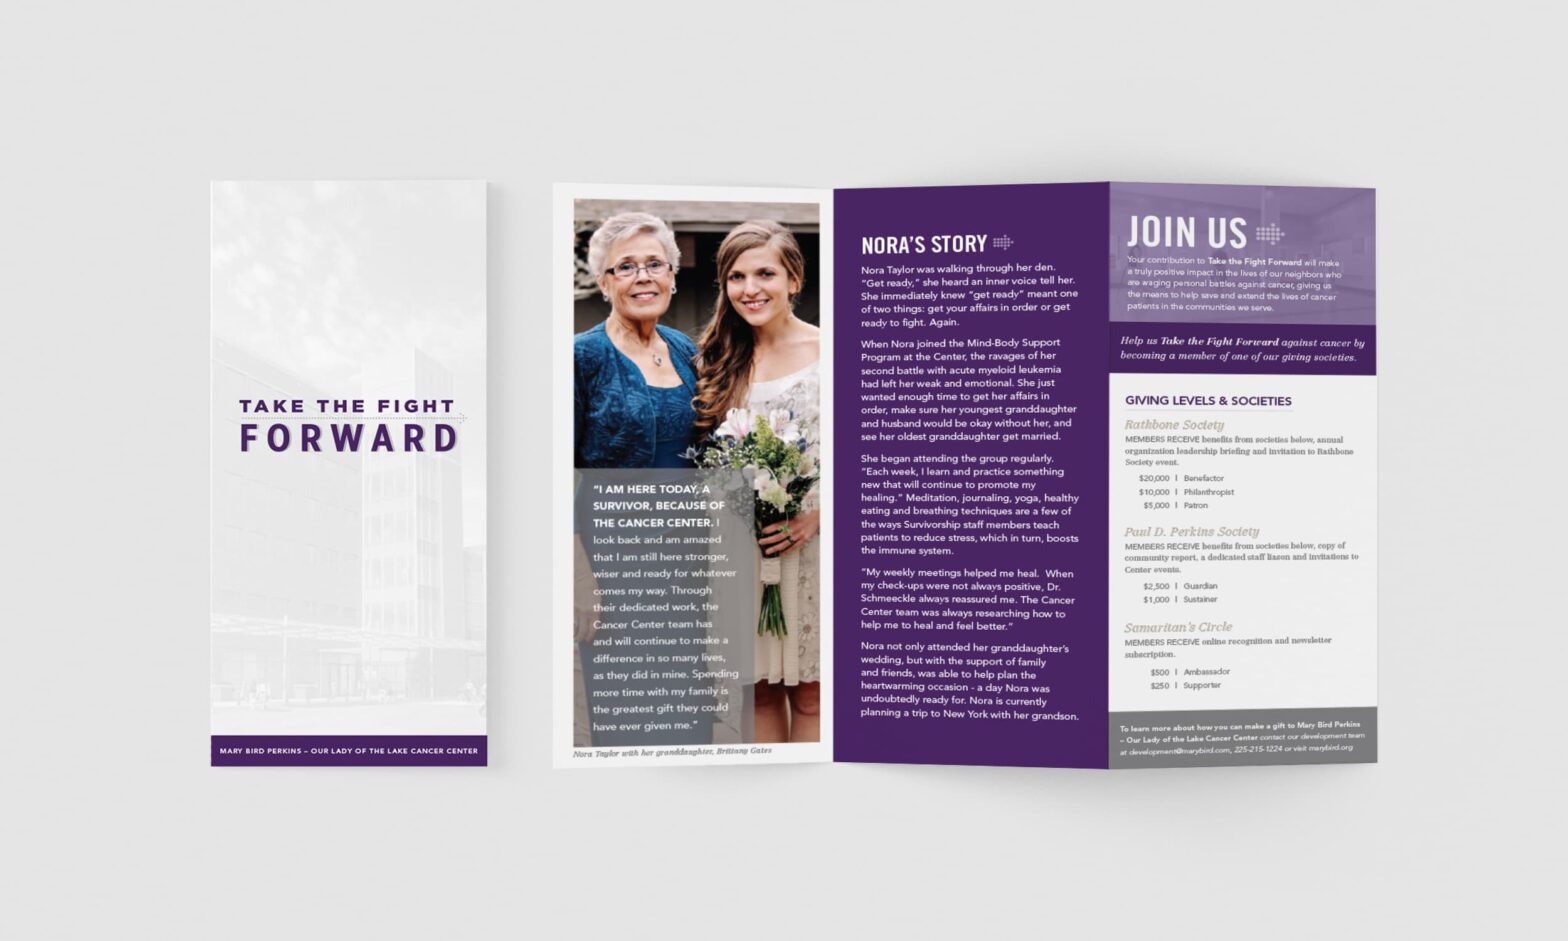 Brochure mockup for "Take the Fight Forward" campaign